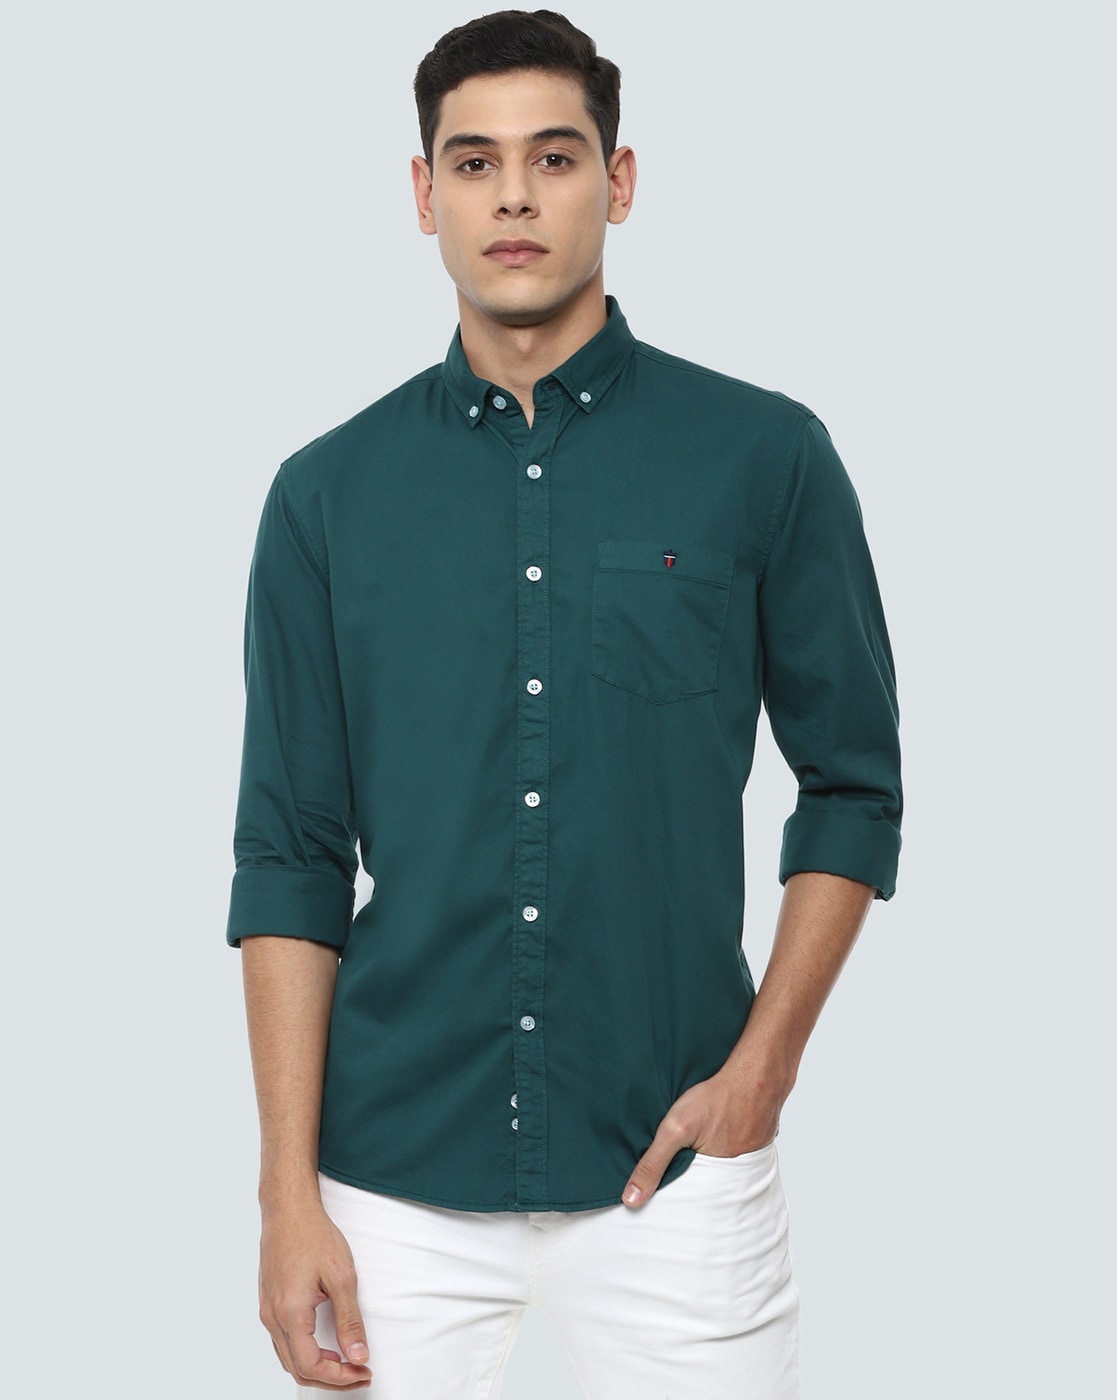 Buy Louis Philippe Men Green & Black Solid Polo Collar T Shirt